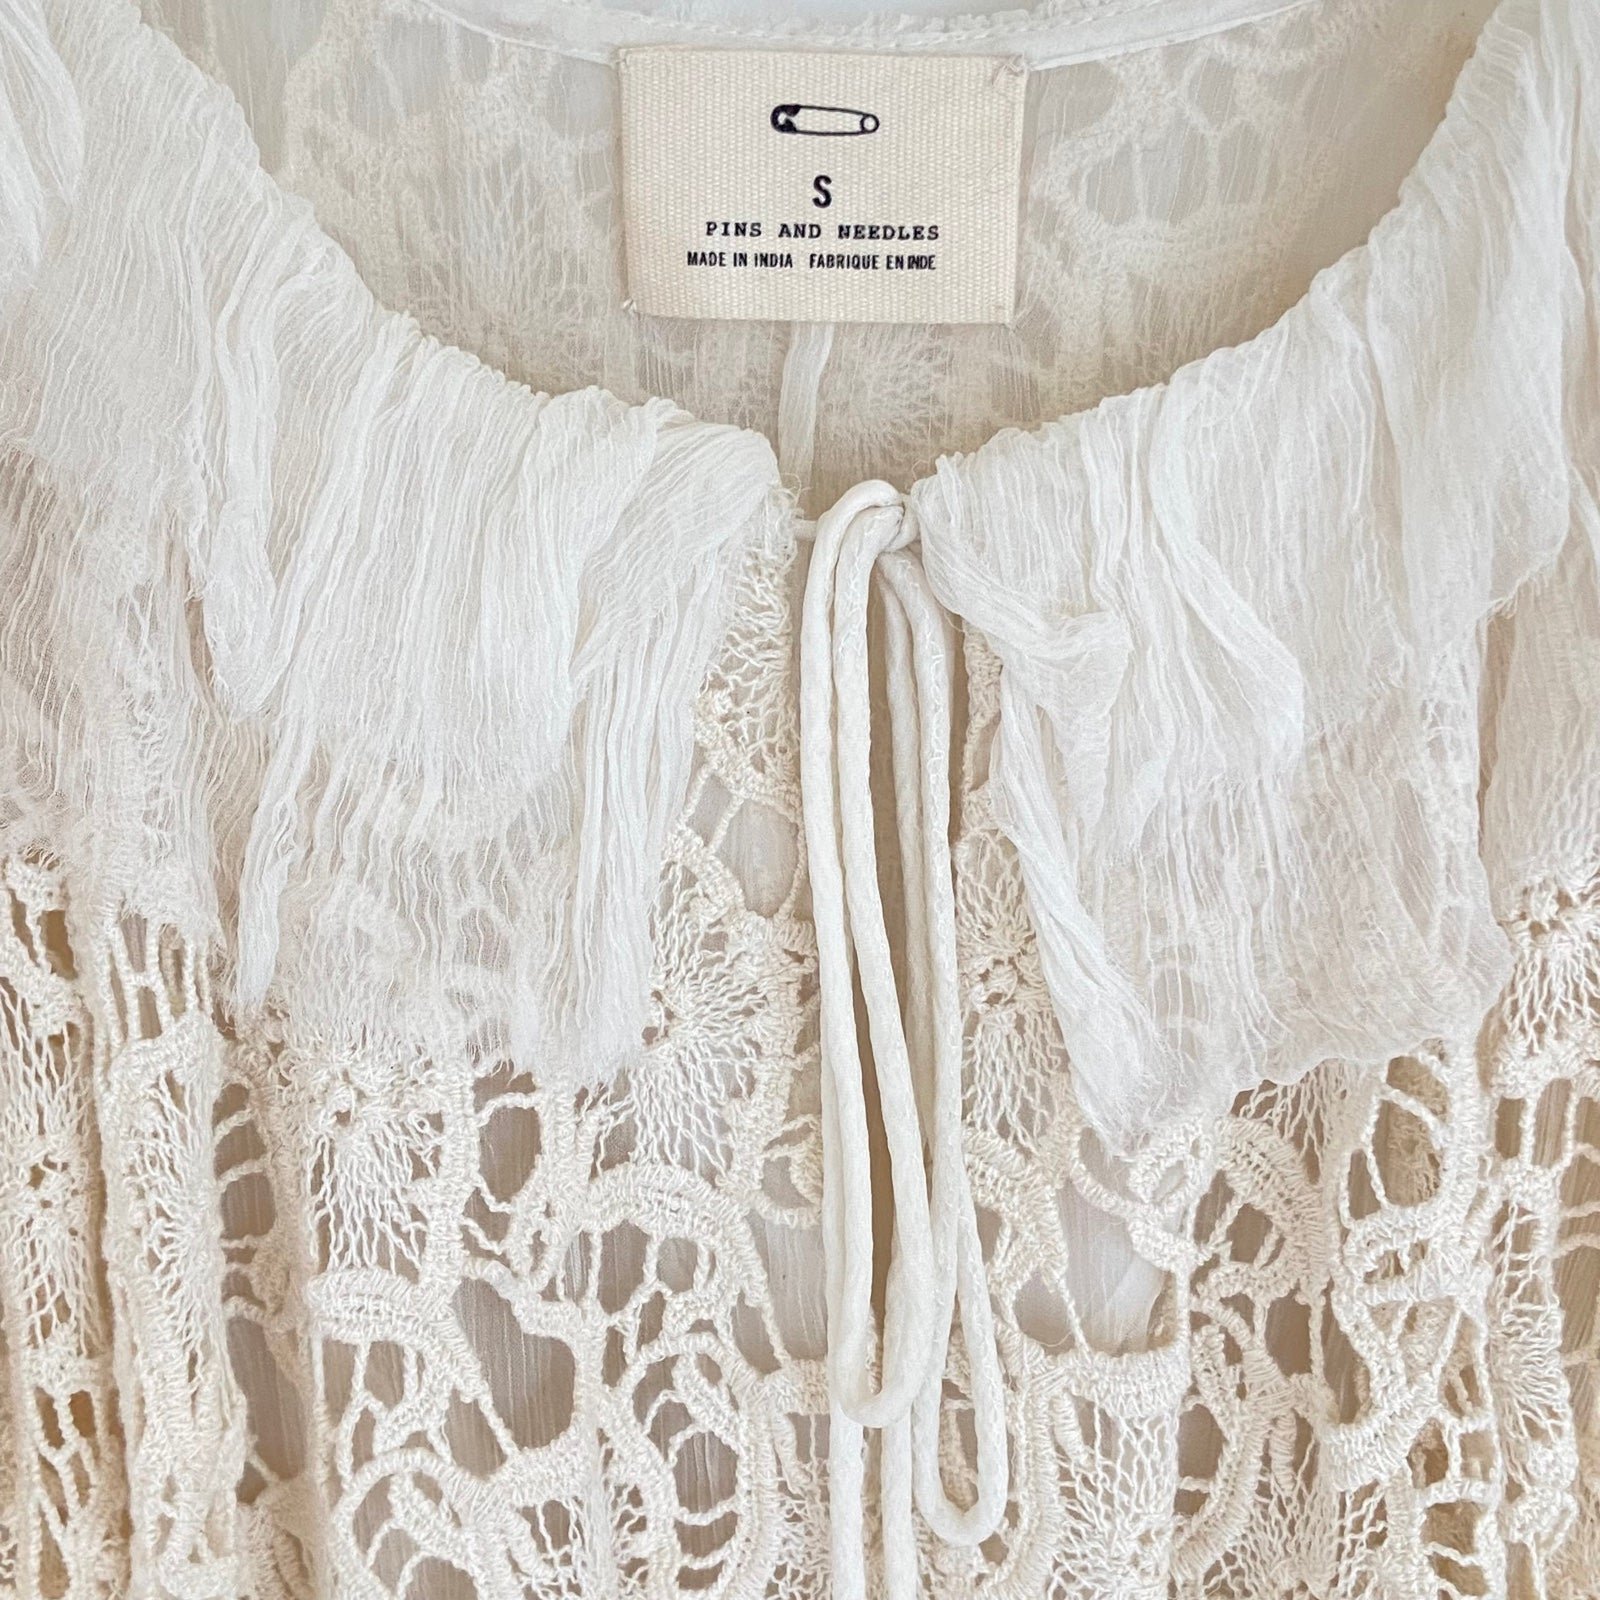 Authentic PINS AND NEEDLES x URBAN OUTFITTERS Natural Lace Crochet Shark Bite Cami K28mjXsDc Outlet Store